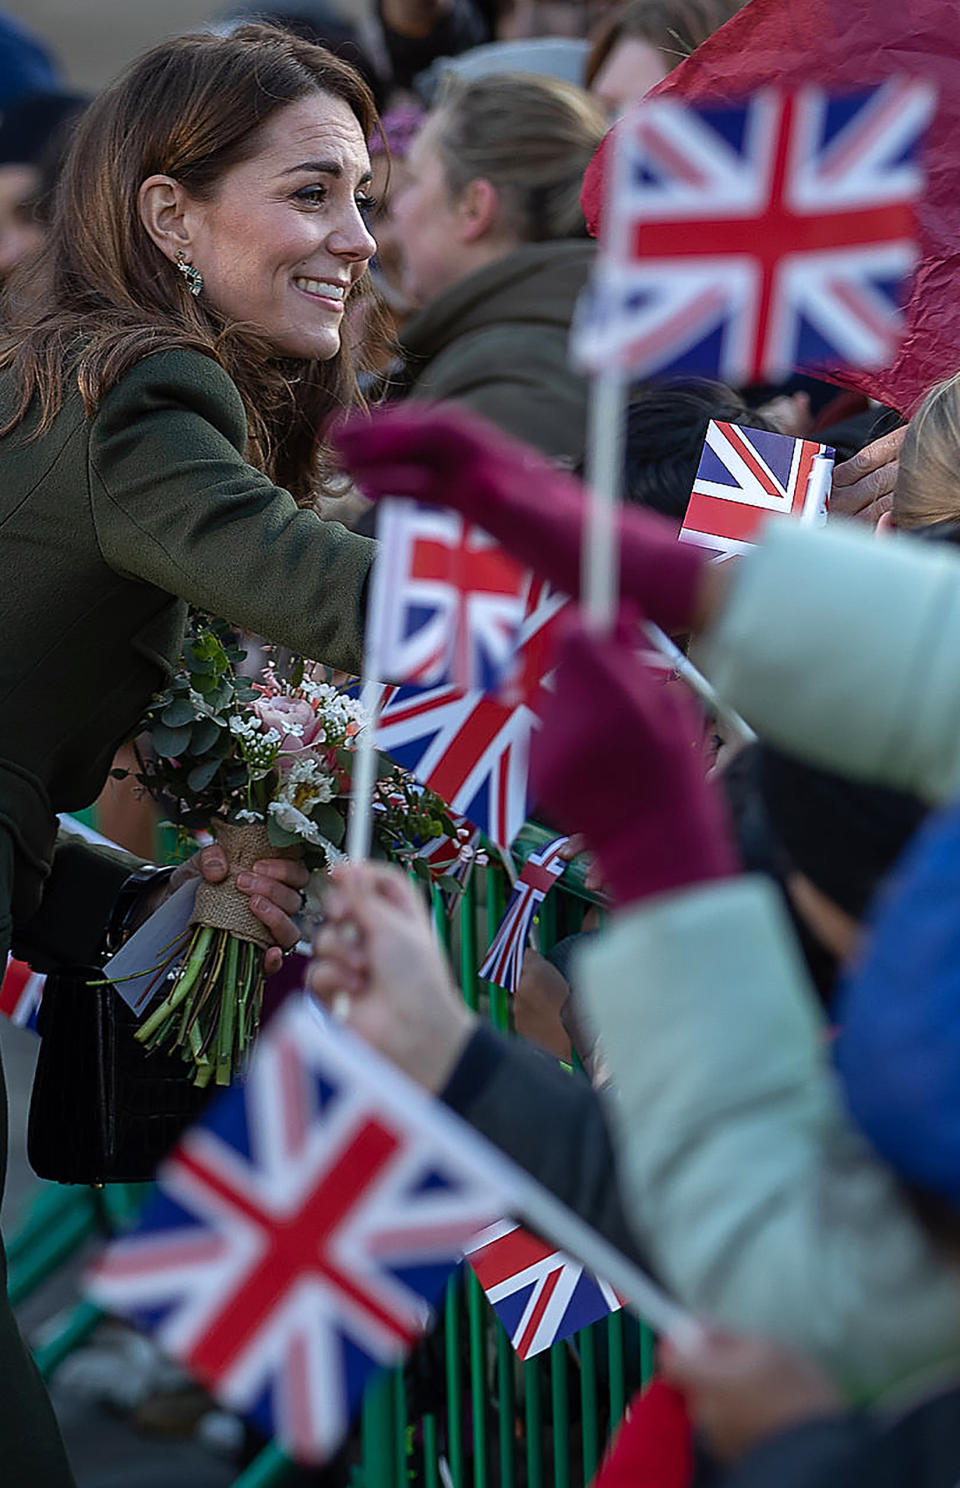 Britain's Catherine, Duchess of Cambridge greets to wellwishers waving Union flags after visiting City Hall in Centenary Square, Bradford on January 15, 2020. (Photo by Charlotte Graham / POOL / AFP) (Photo by CHARLOTTE GRAHAM/POOL/AFP via Getty Images)